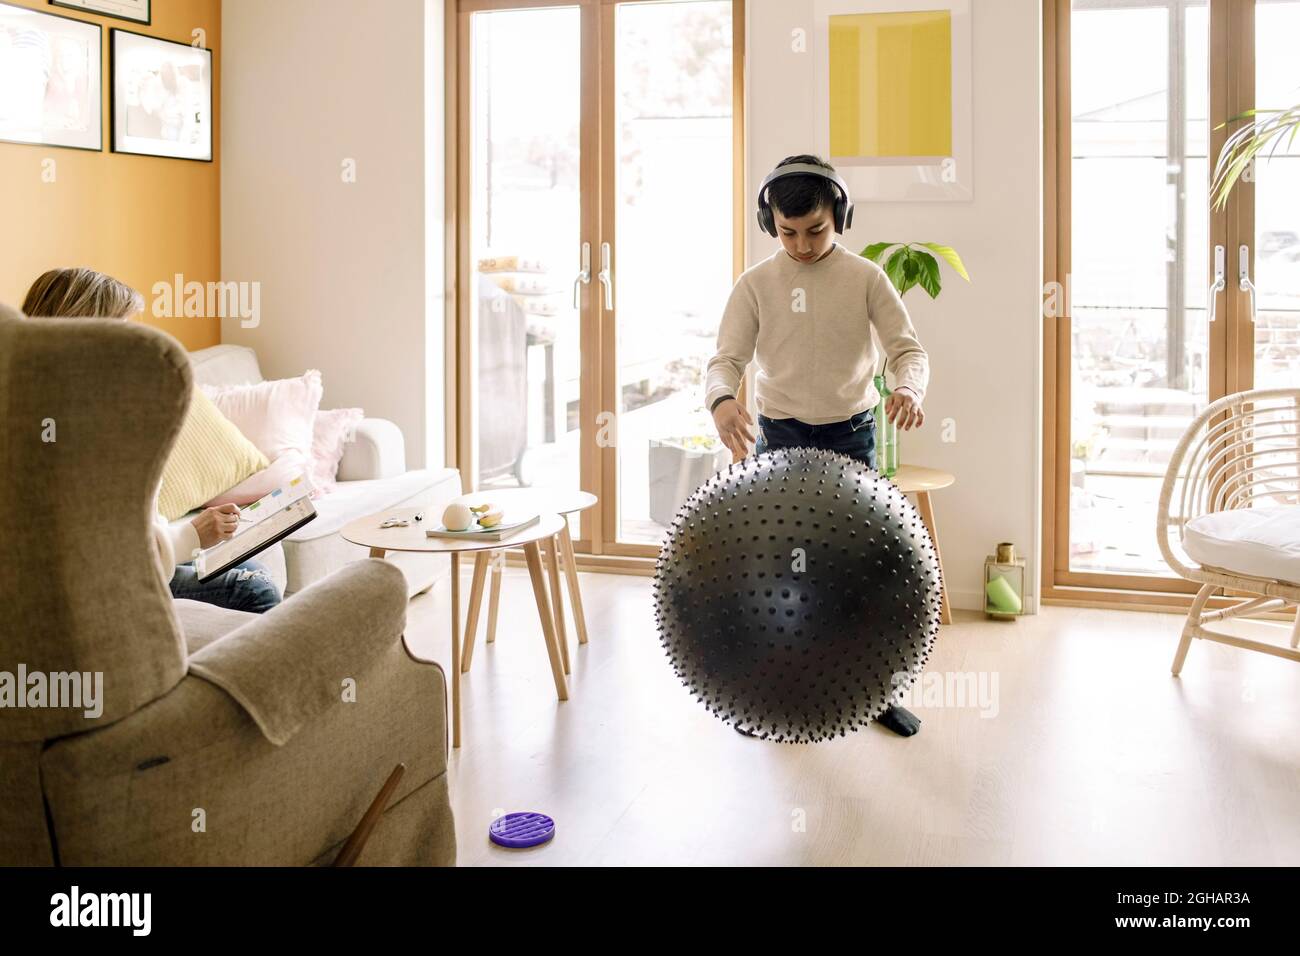 Pre-adolescent boy playing with fitness ball in living room Stock Photo